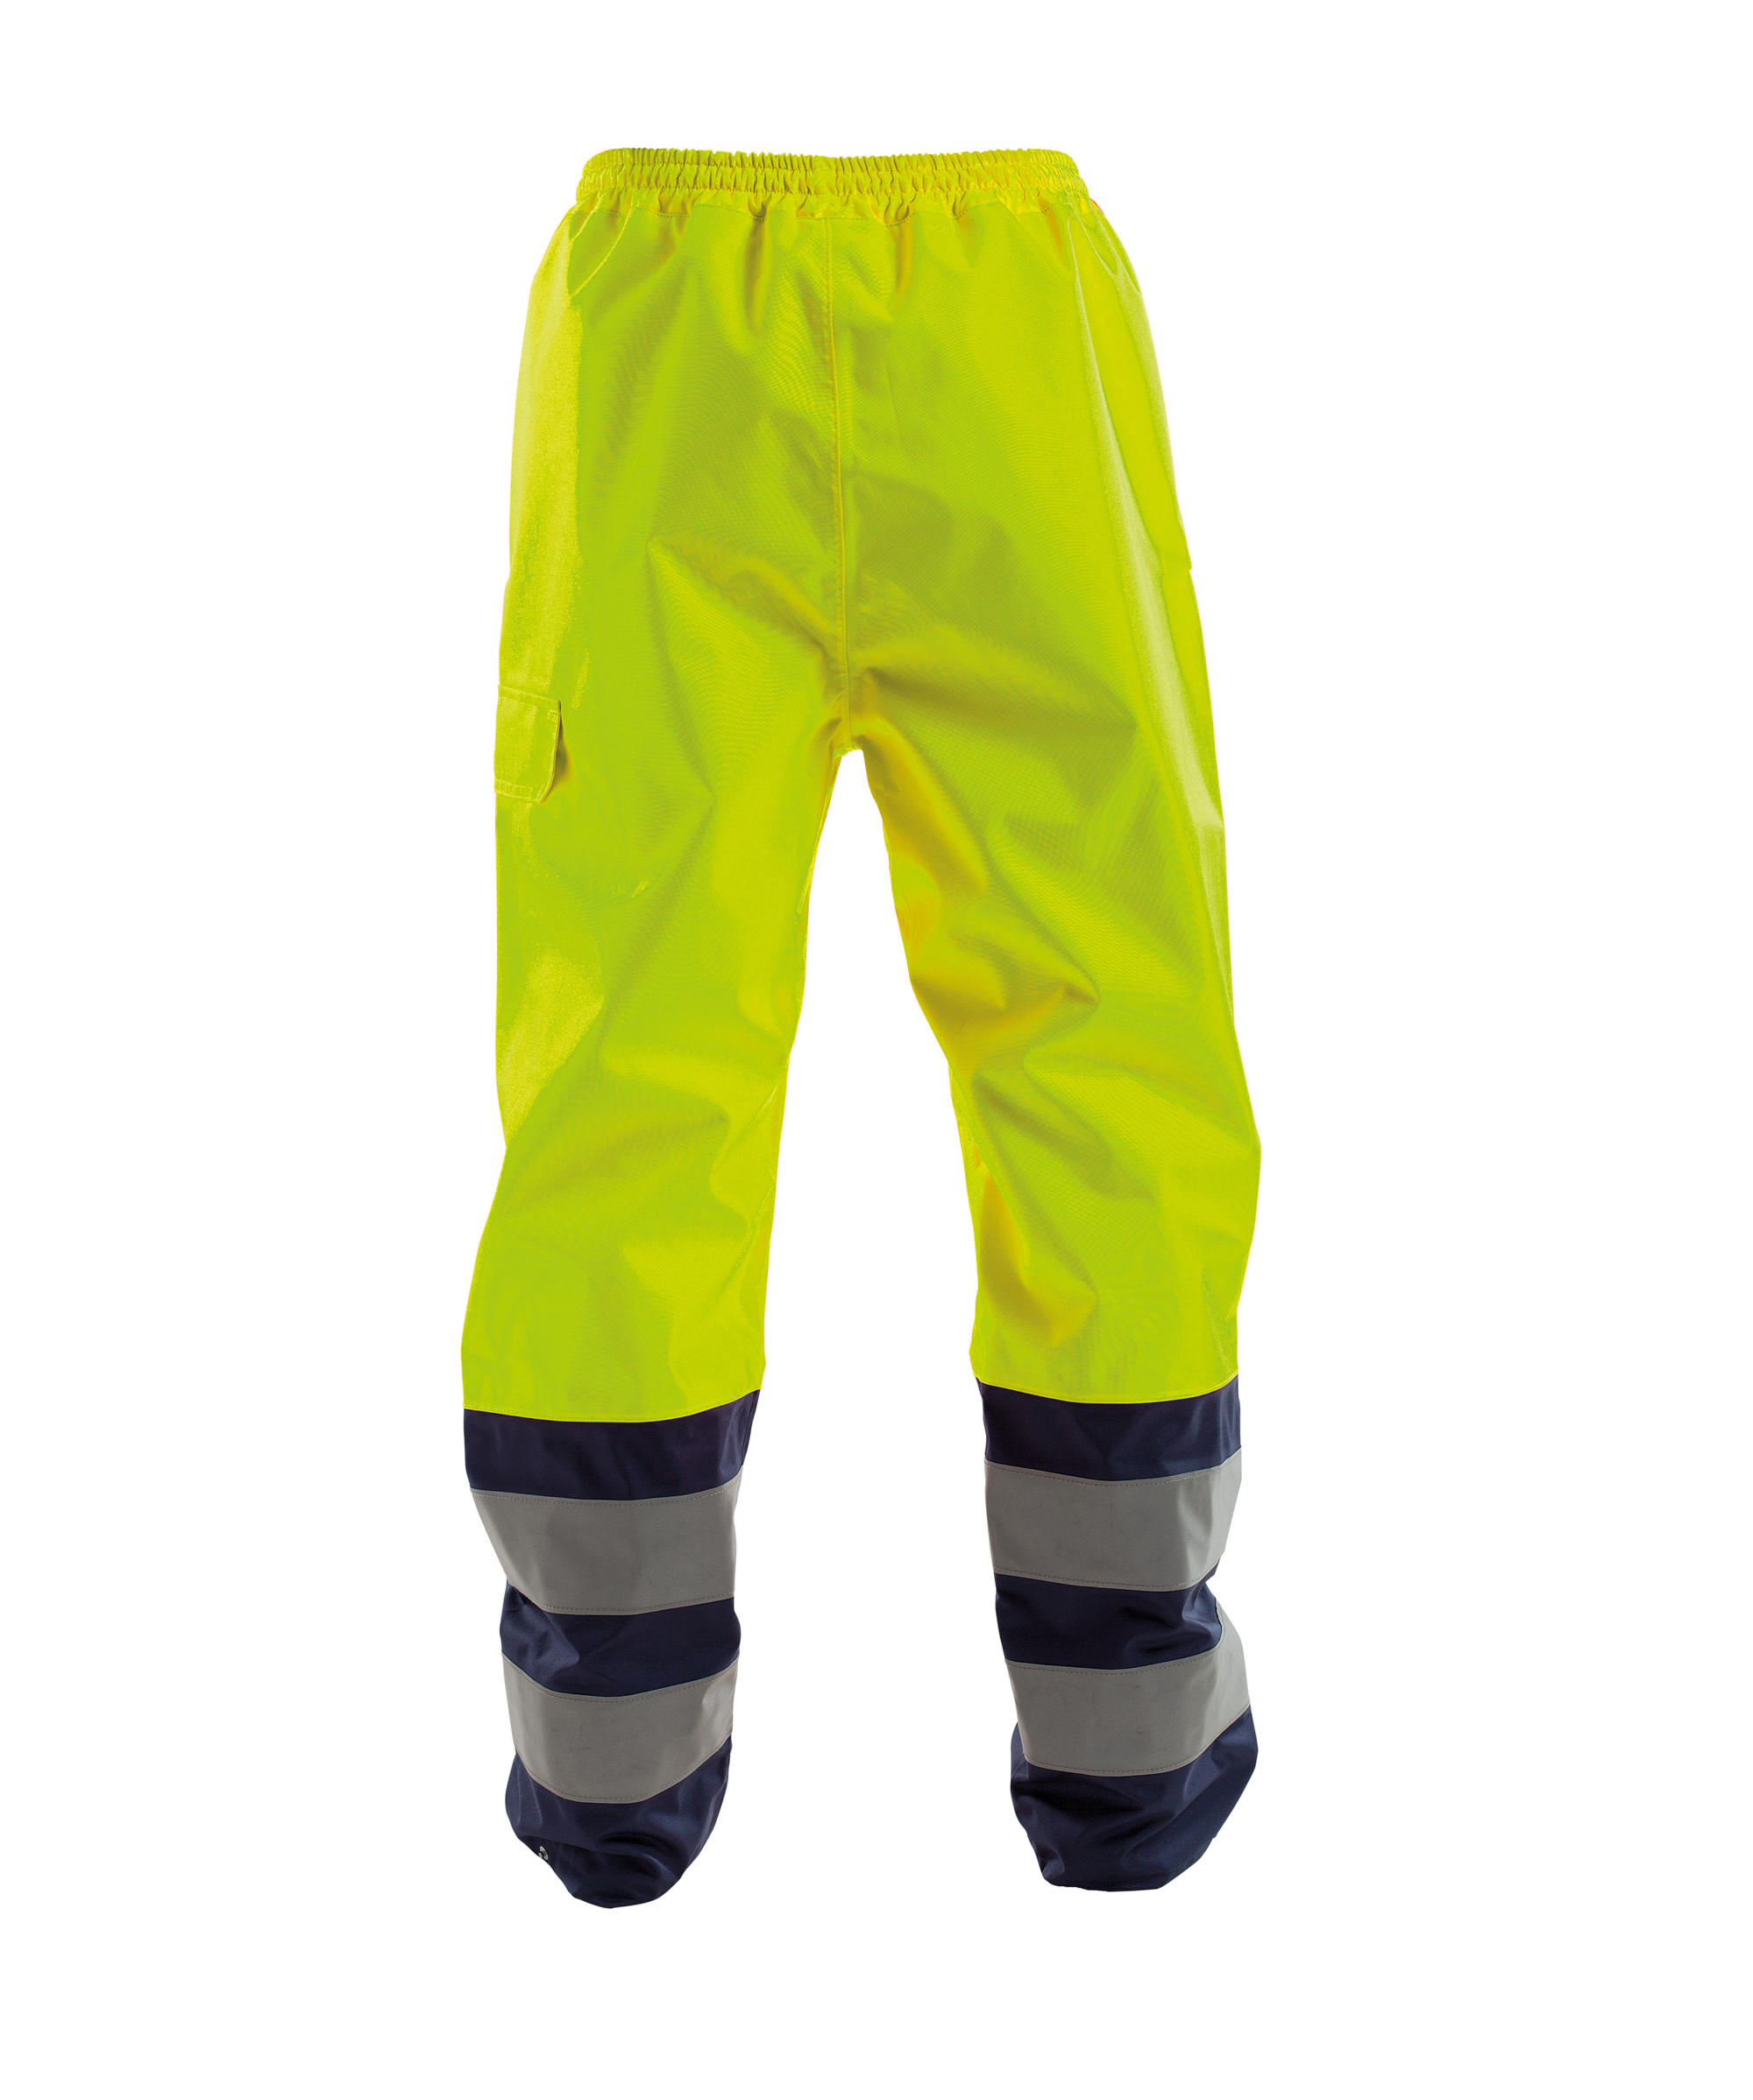 sola_high-visibility-waterproof-work-trousers_fluo-yellow-navy_back.jpg